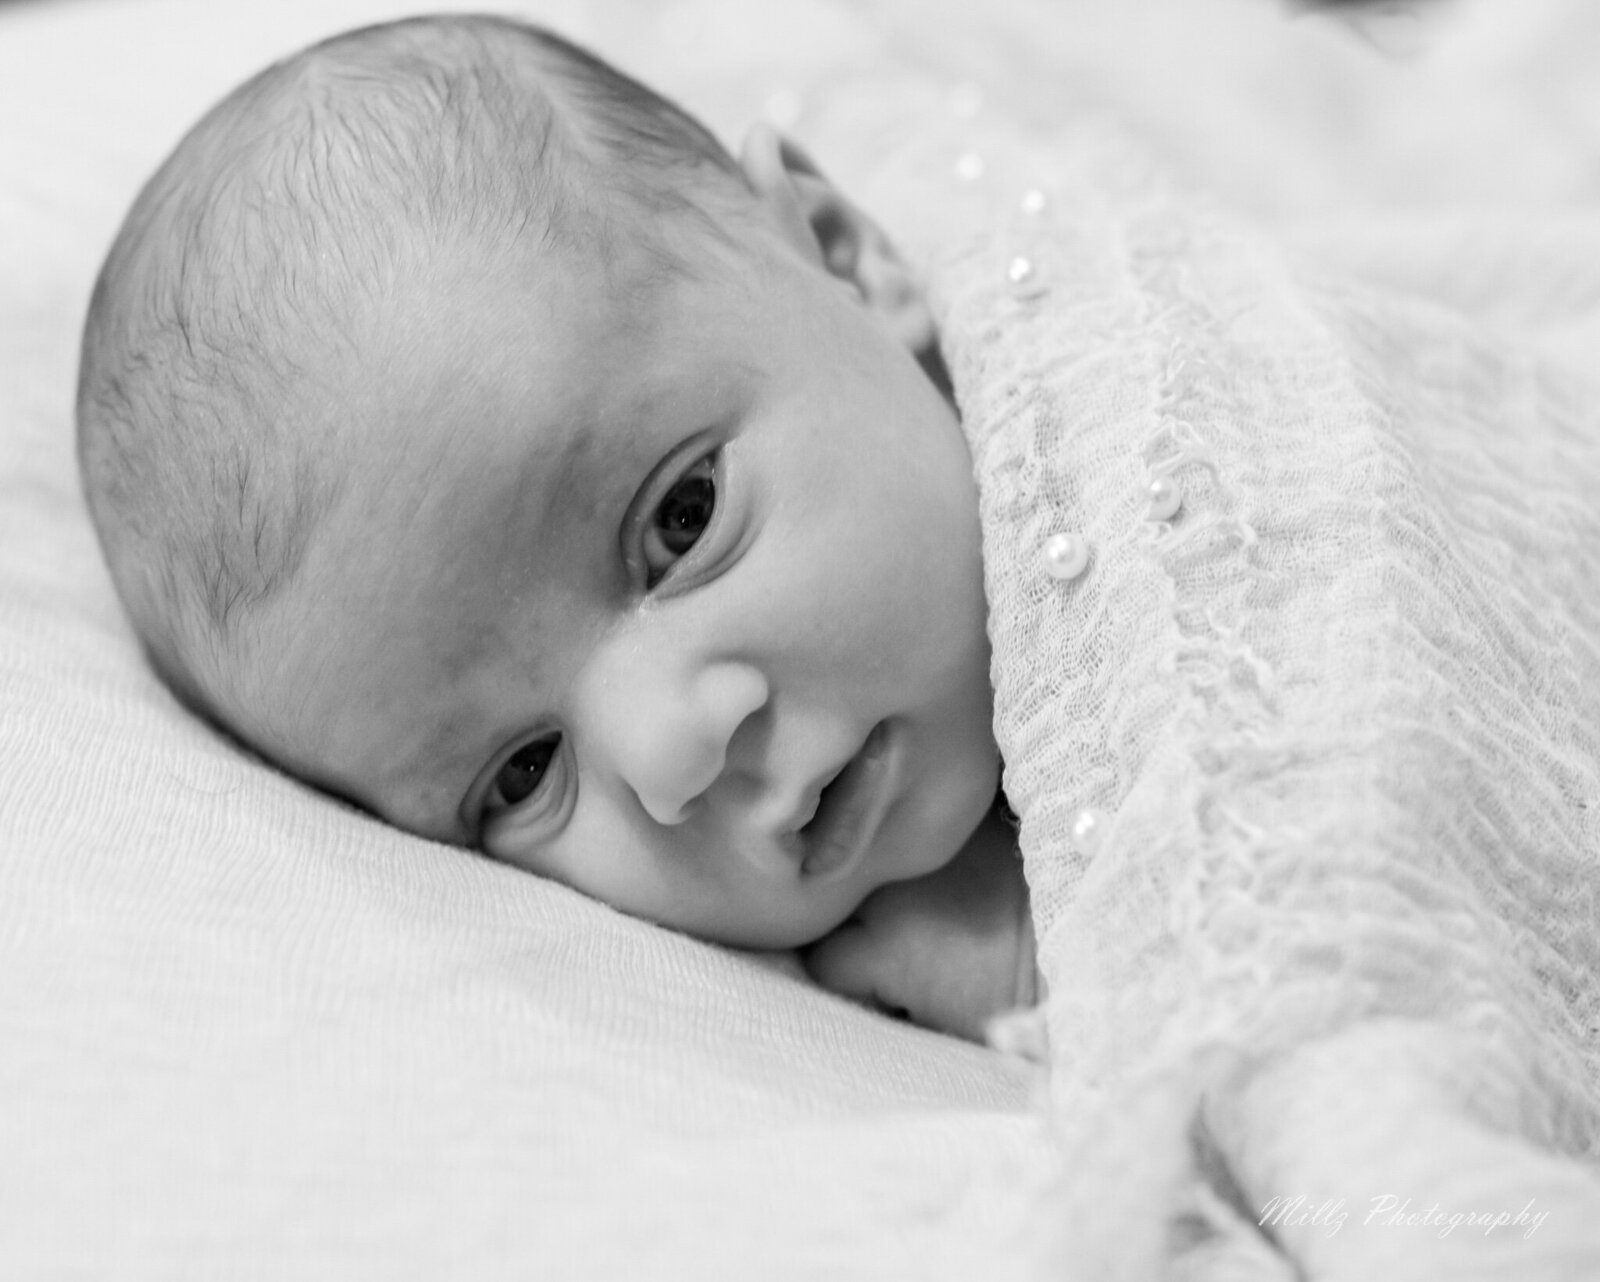 newborn baby awake and alert laying down photographed by Millz Photography in Greenville, SC